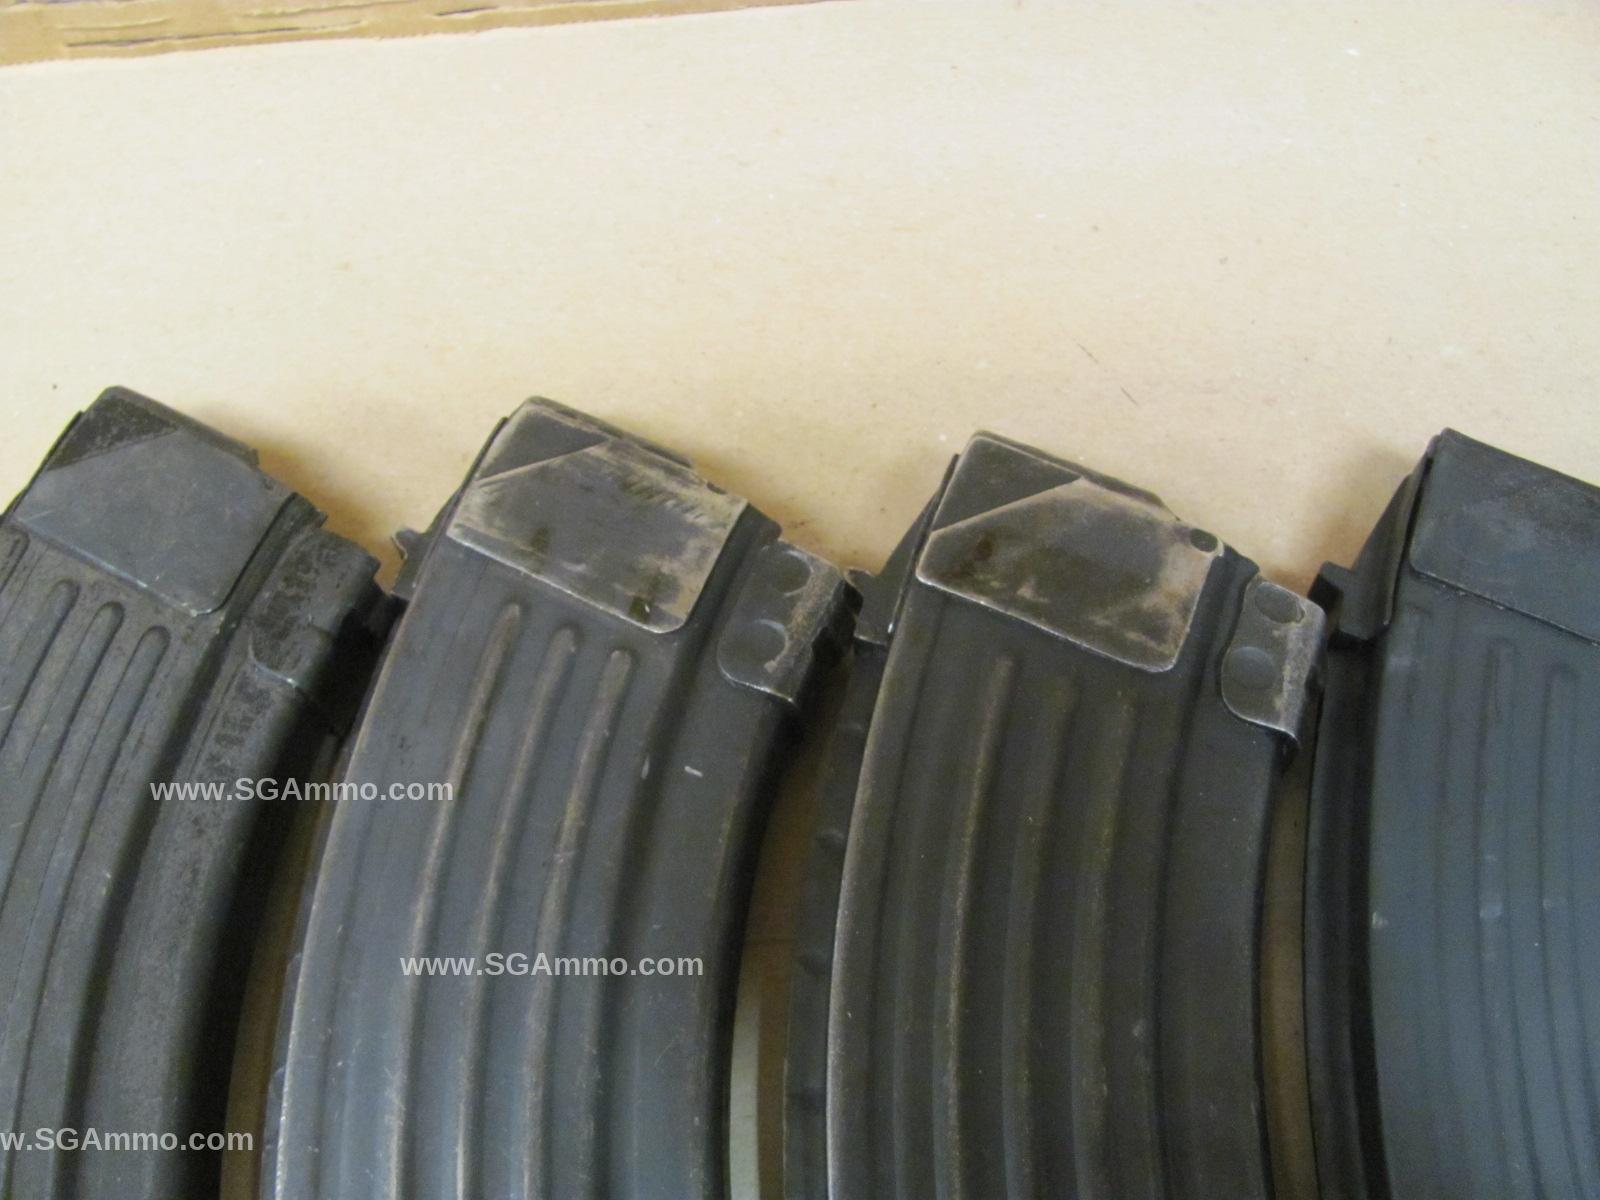 5 x 30 Round AK-47 Mags in Vinyl Pouch - Used Condition Fair to Excellent - Sold AS-IS - Hungarian Military Surplus Steel Magazines